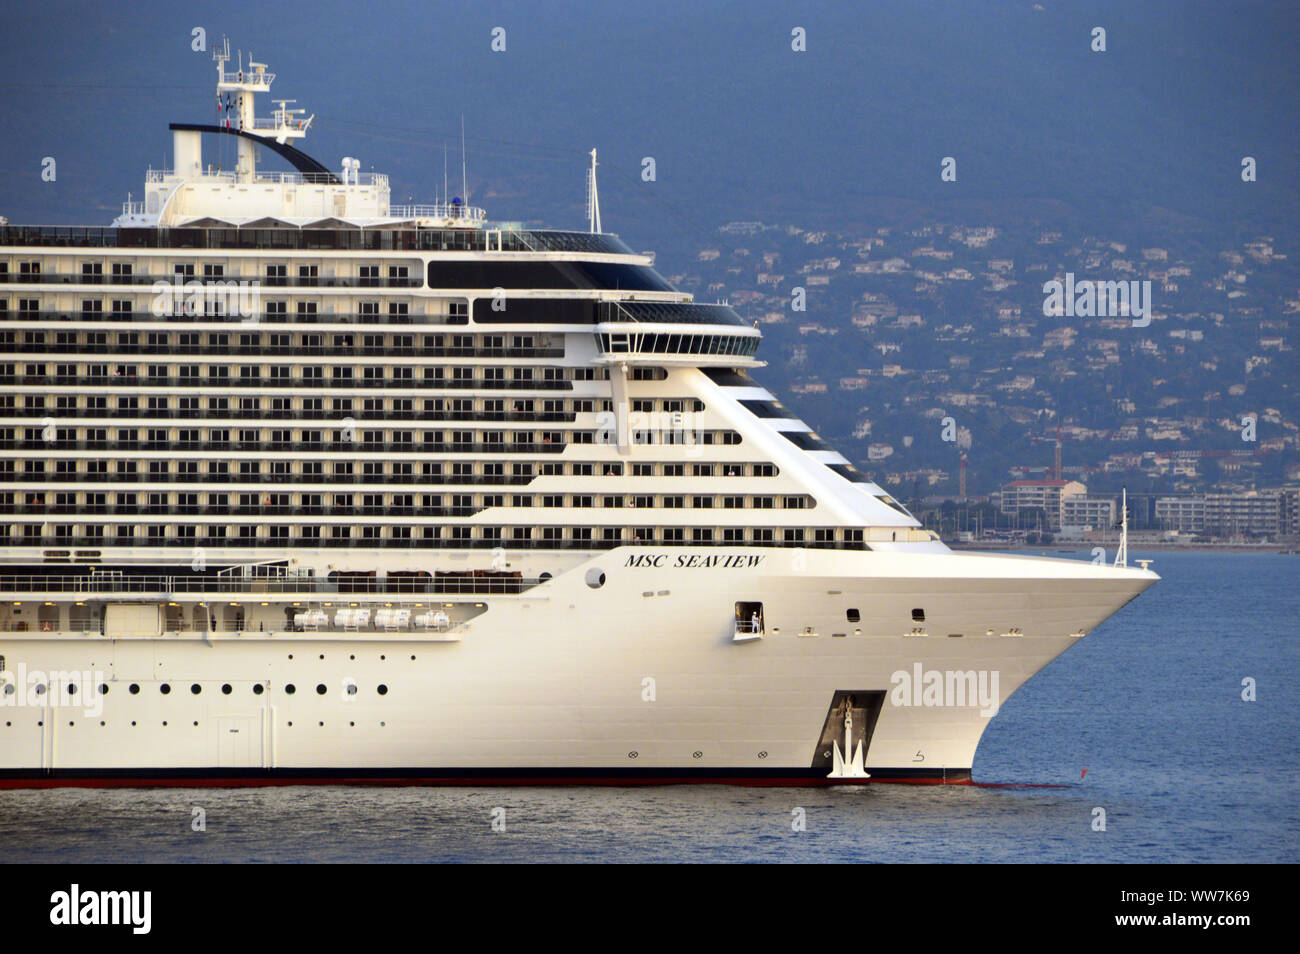 The Large Luxury Cruise Ship MSC 'Seaview' in the Bay Outside the Harbour  at Cannes, Cote d'Azur, France, EU Stock Photo - Alamy